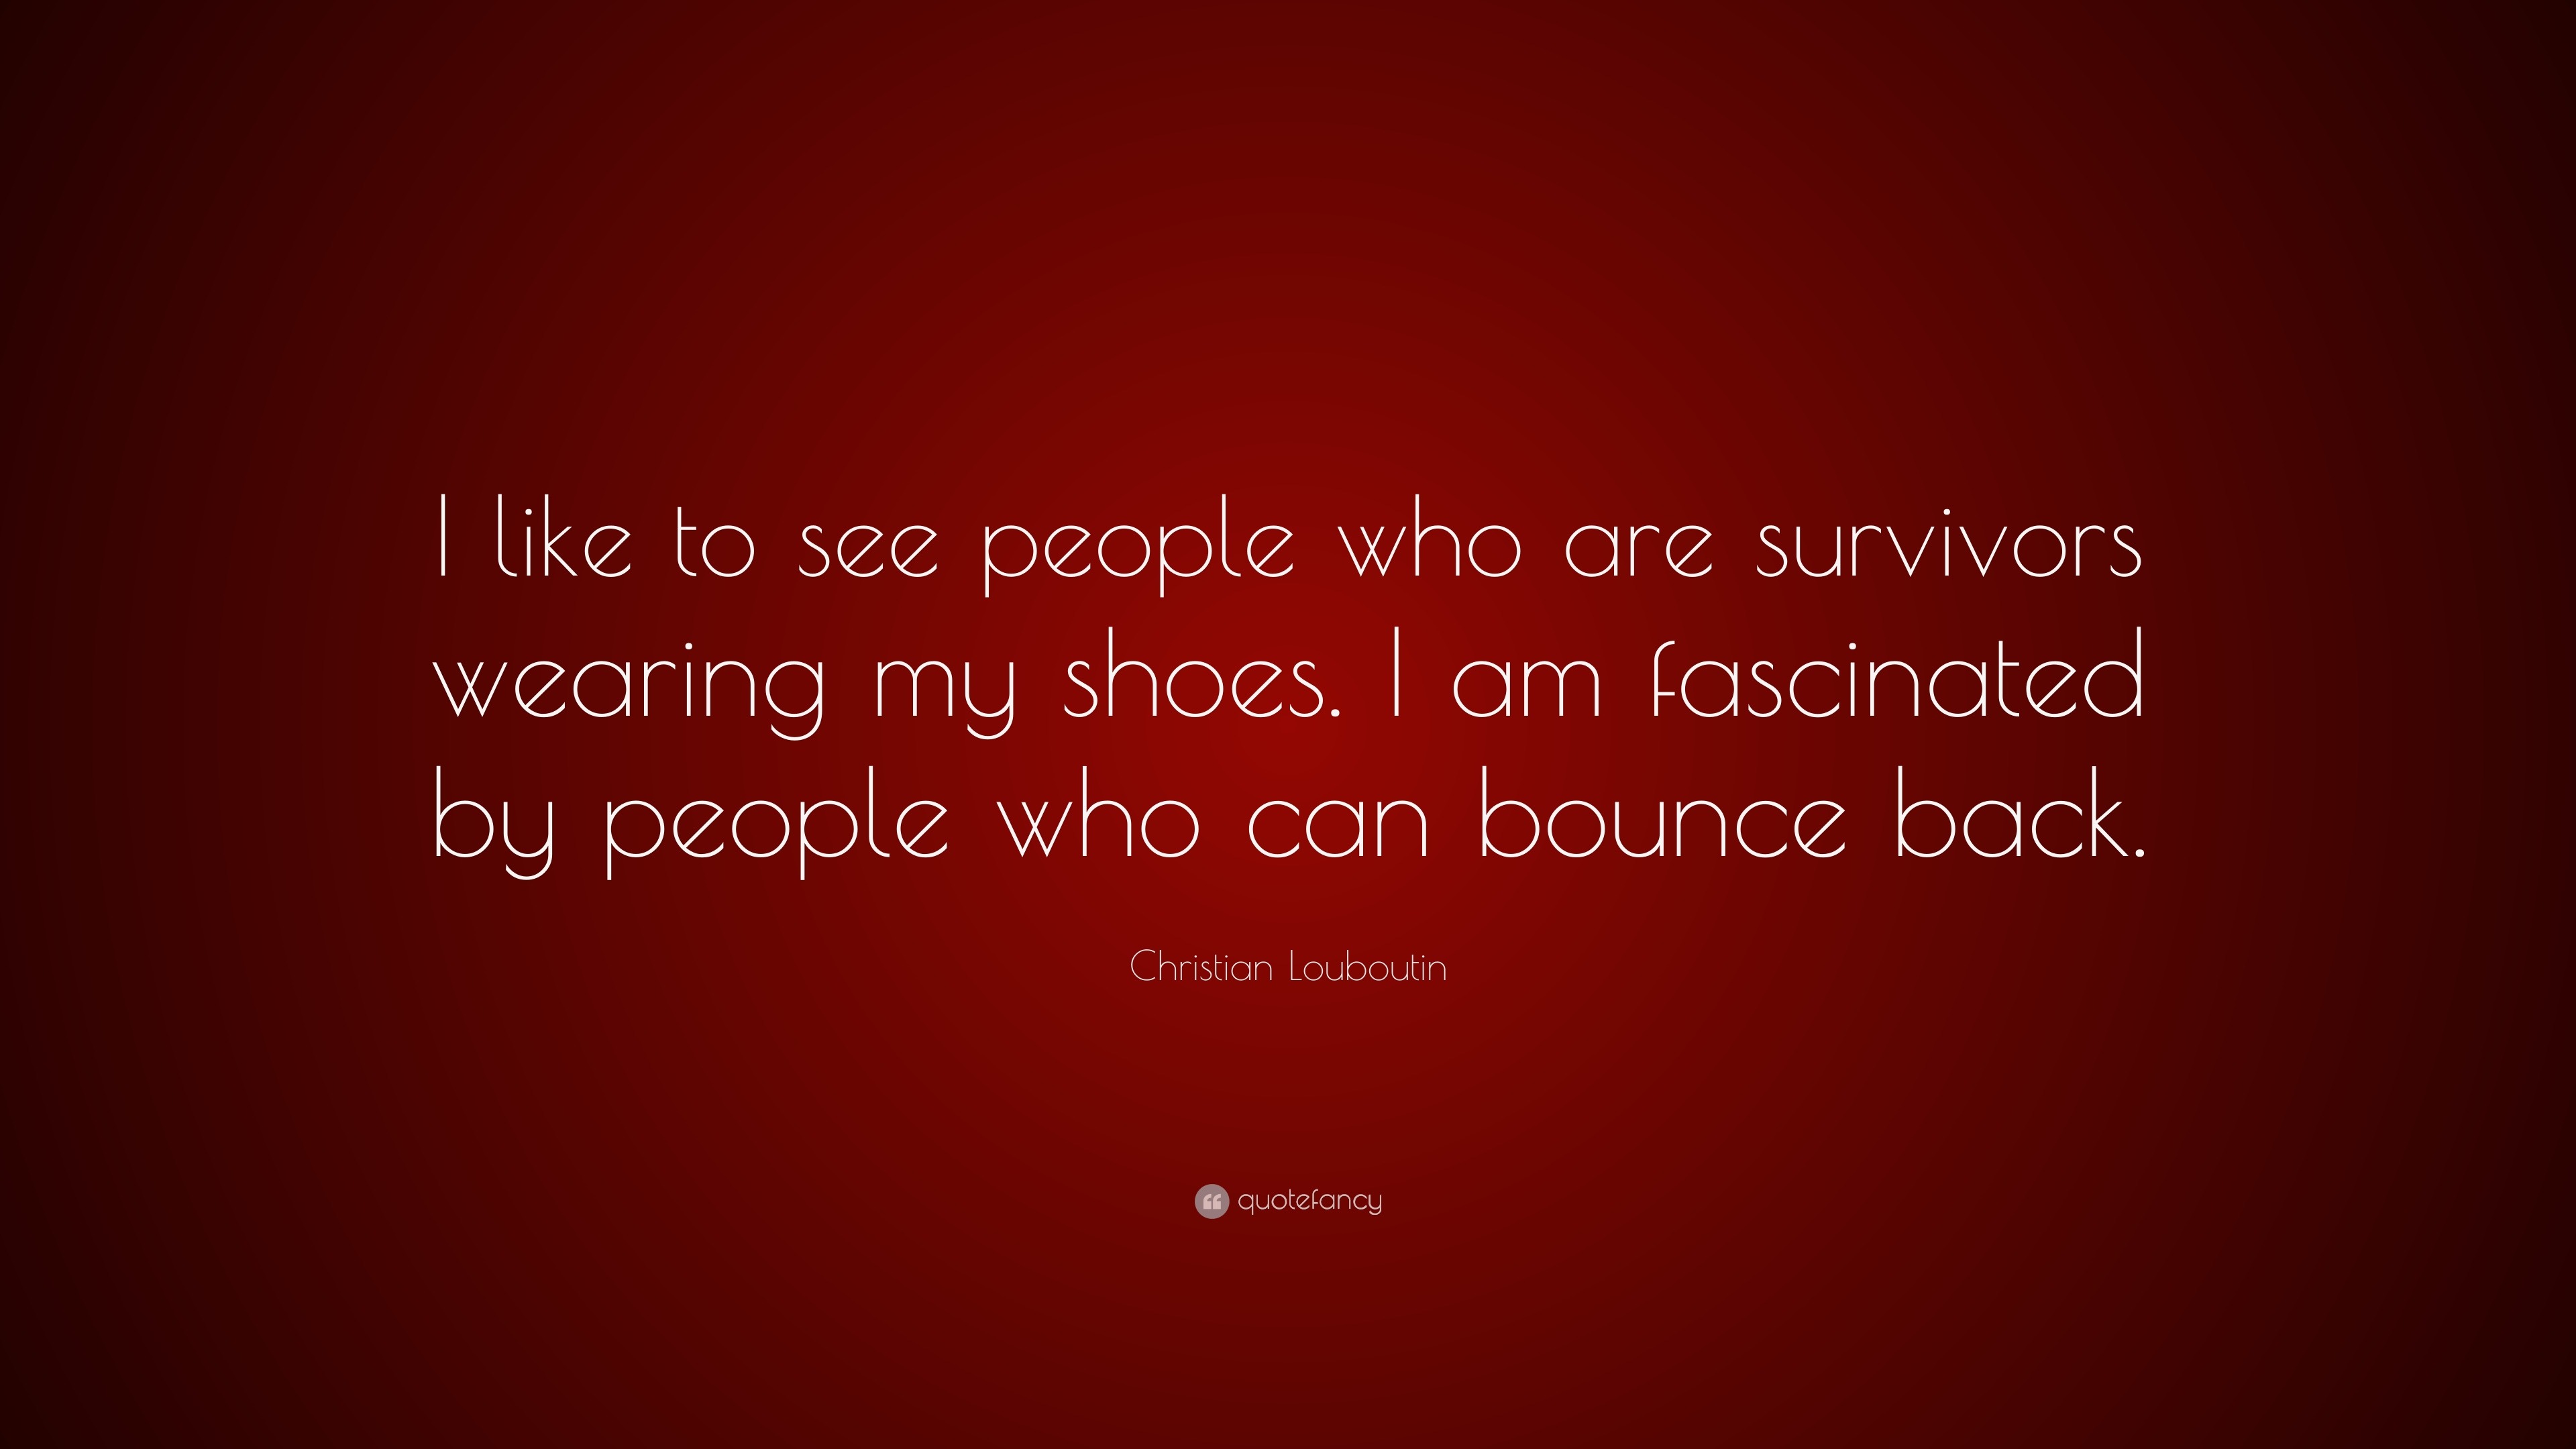 150 Louboutin Quotes (2022 Update) - Quotefancy